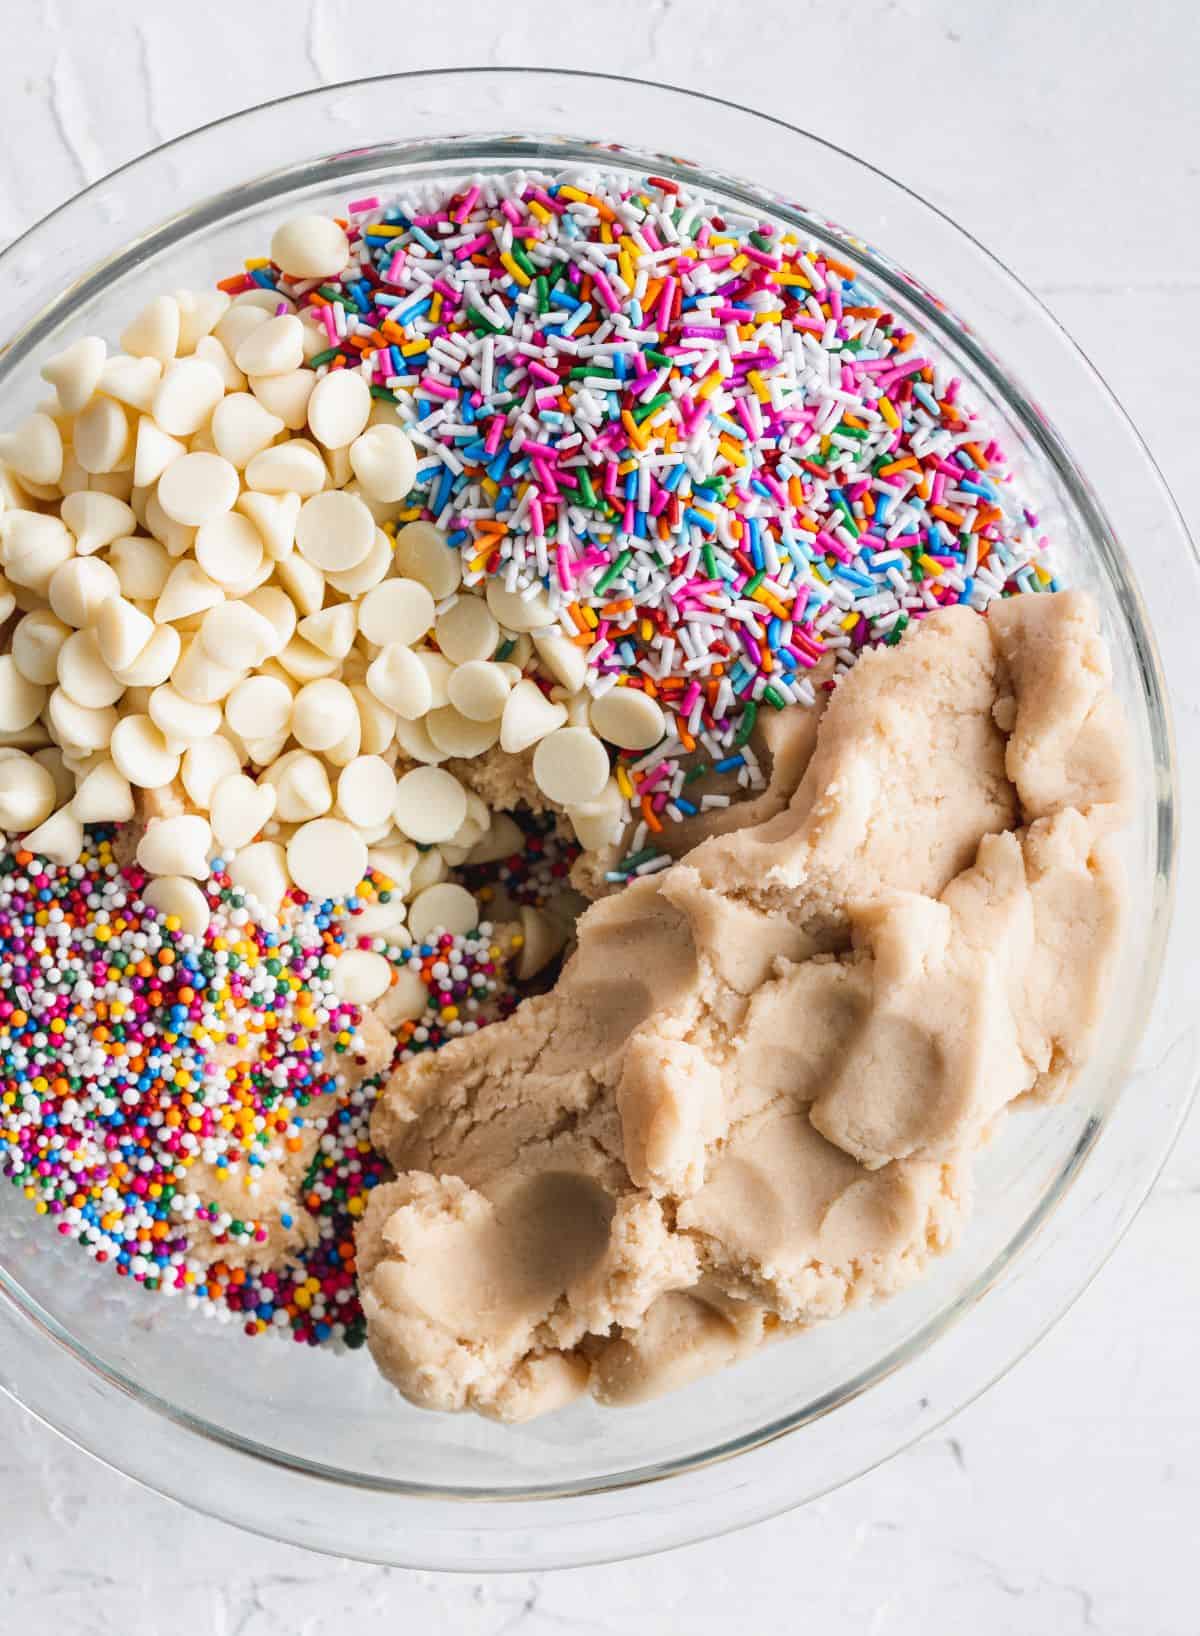 Dough with sprinkles on top.